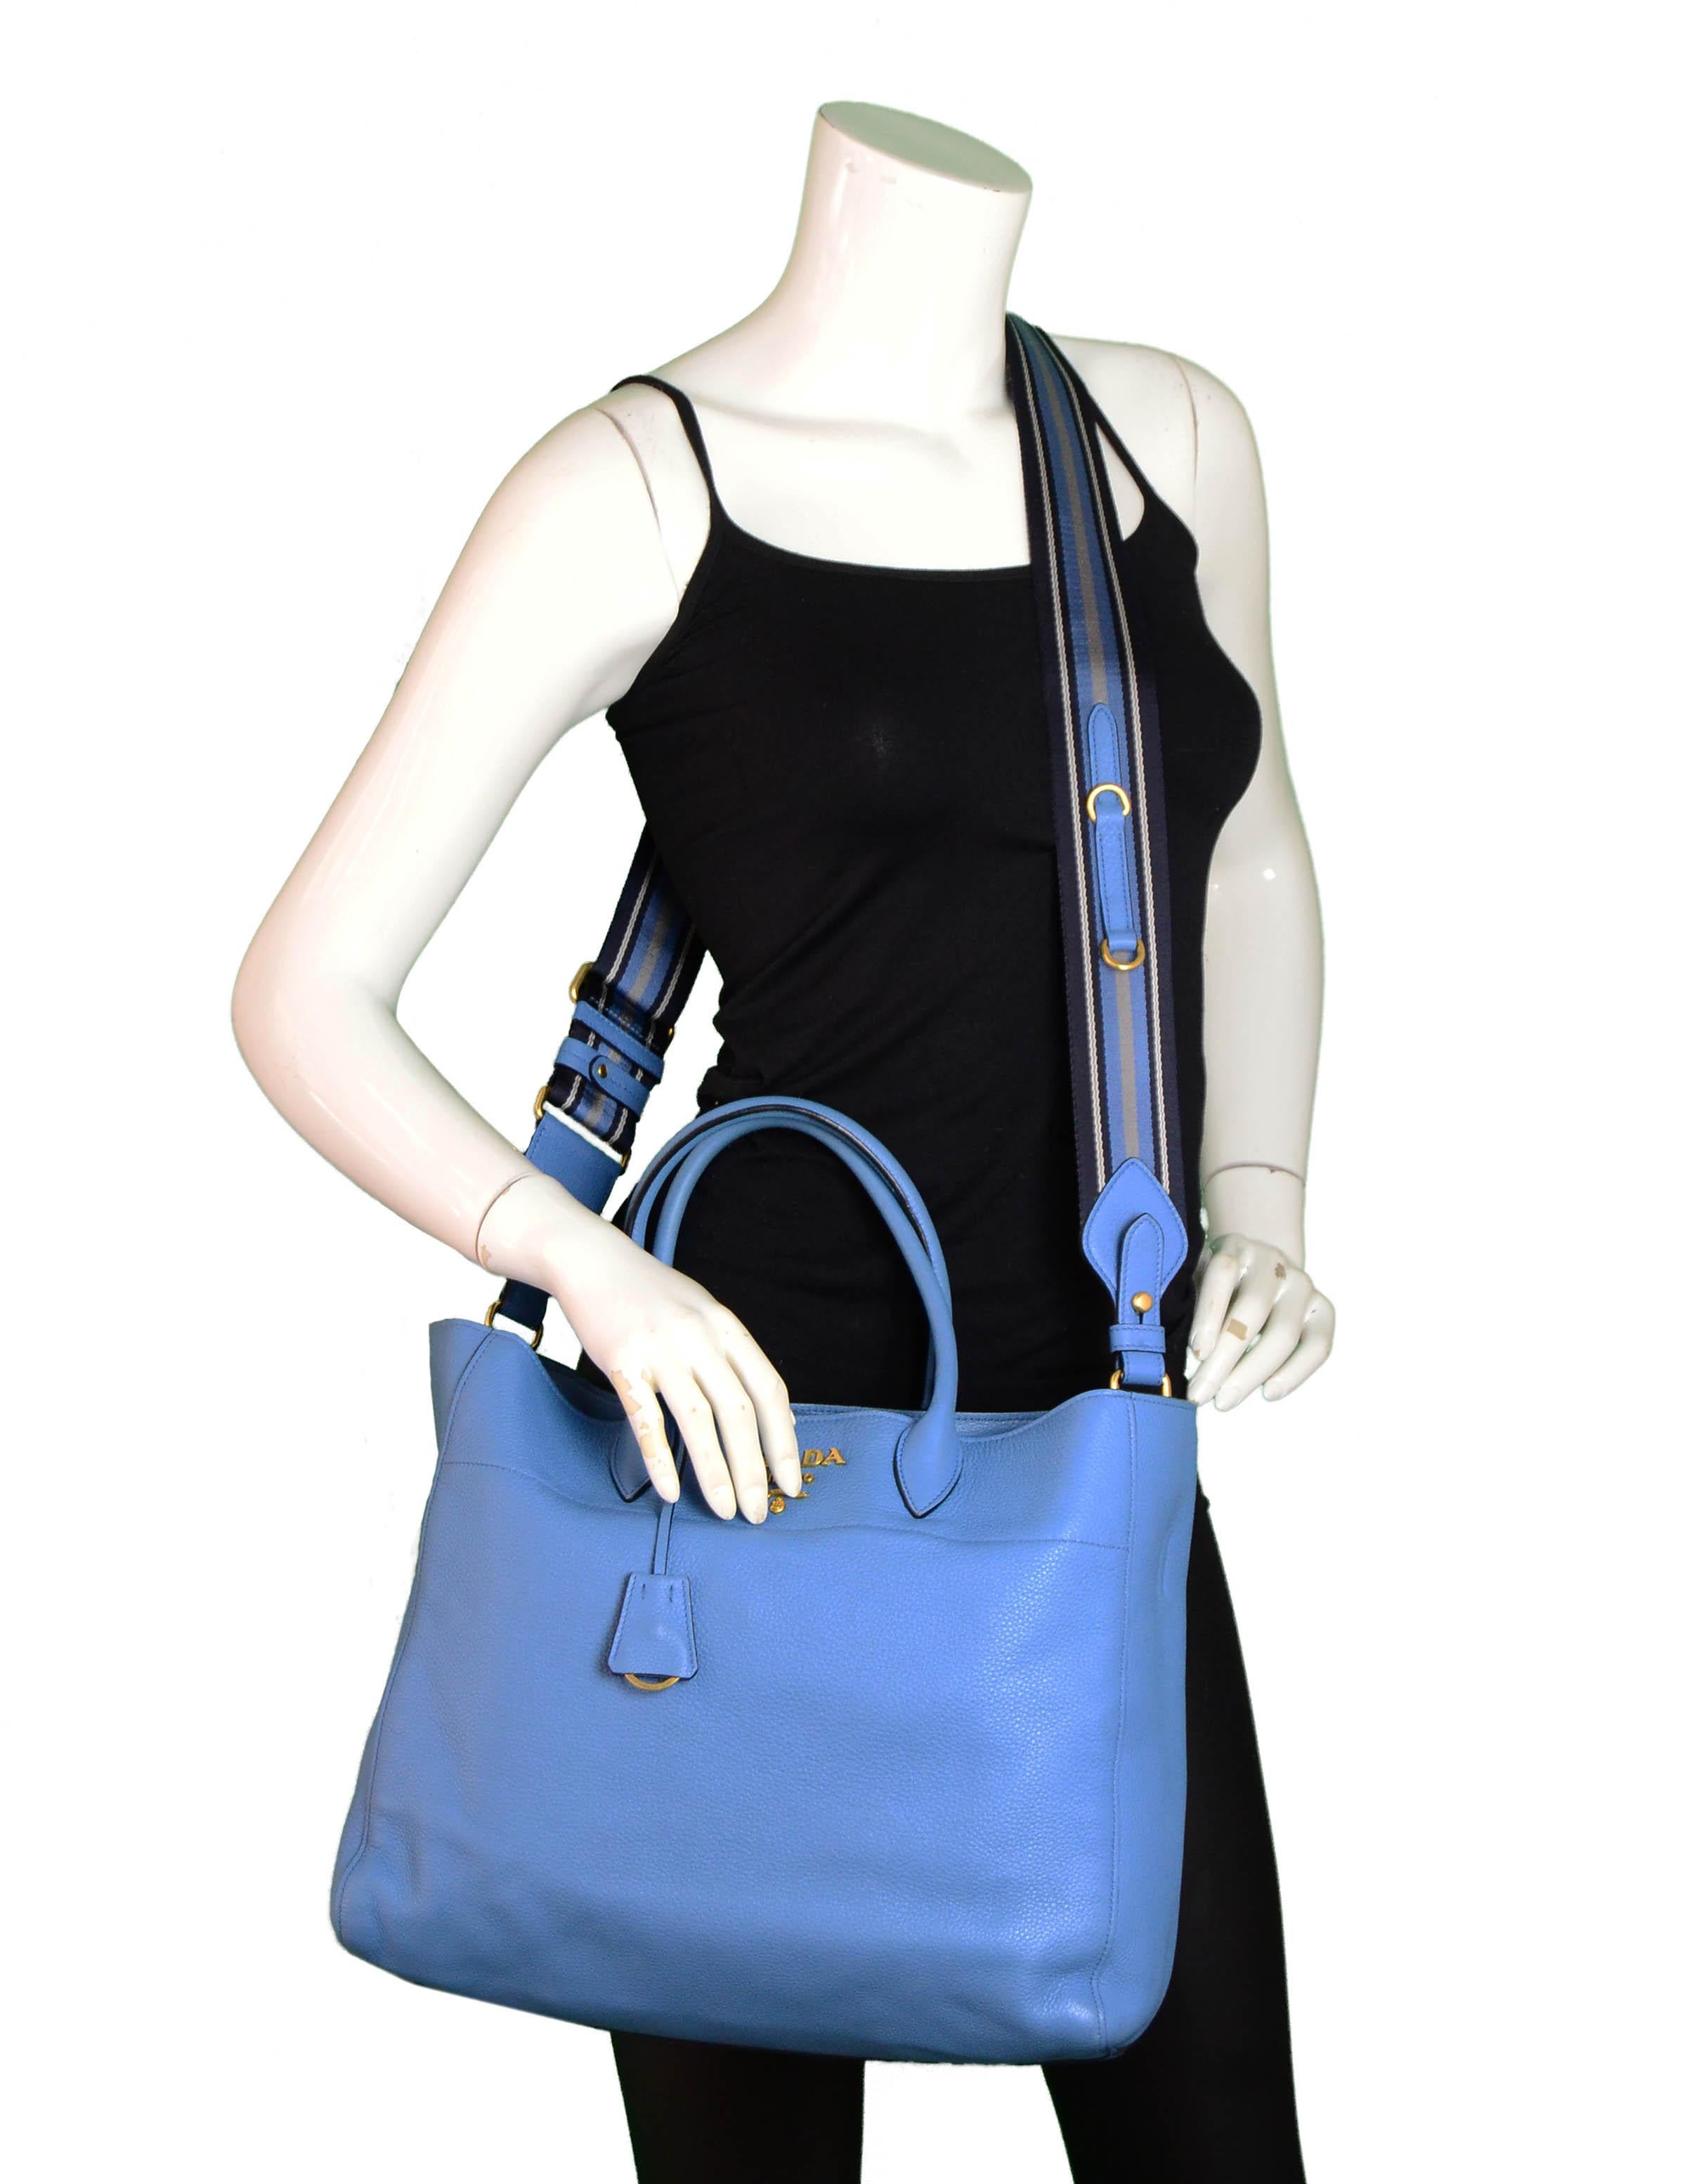 Prada Mare Blue Vitello Daino Leather Tote Bag.  Features detachable canvas strap.

Made In: Italy
Year of Production: 2018
Color: Mare blue
Hardware: Goldtone
Materials: Vitello Daino leather
Lining: Black textile
Closure/Opening: Magnetic
Interior